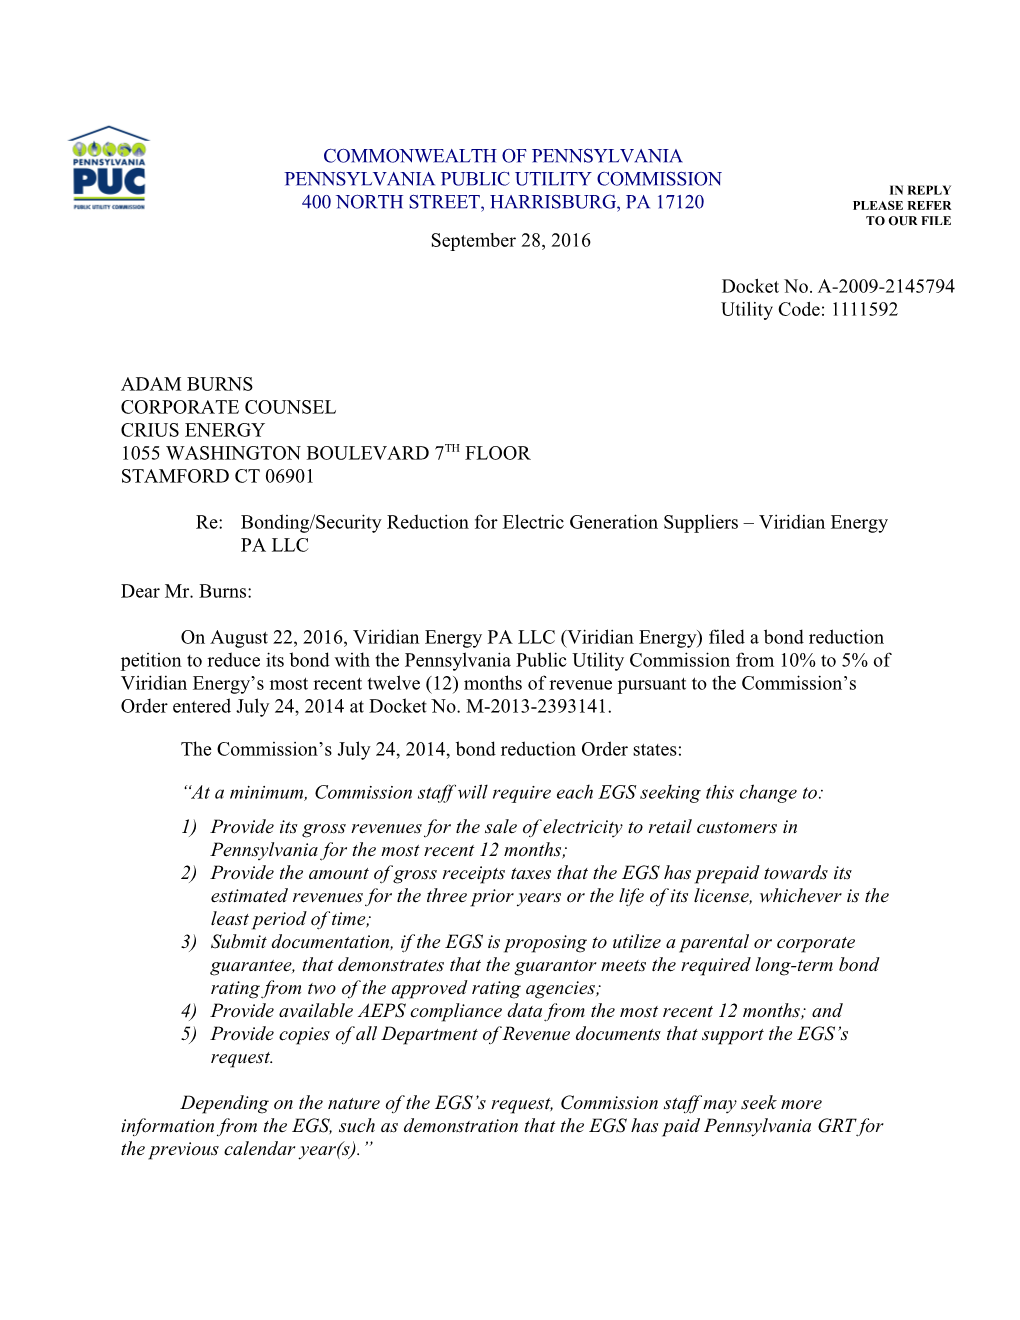 Re: Bonding/Security Reduction for Electric Generation Suppliers Viridian Energy PA LLC